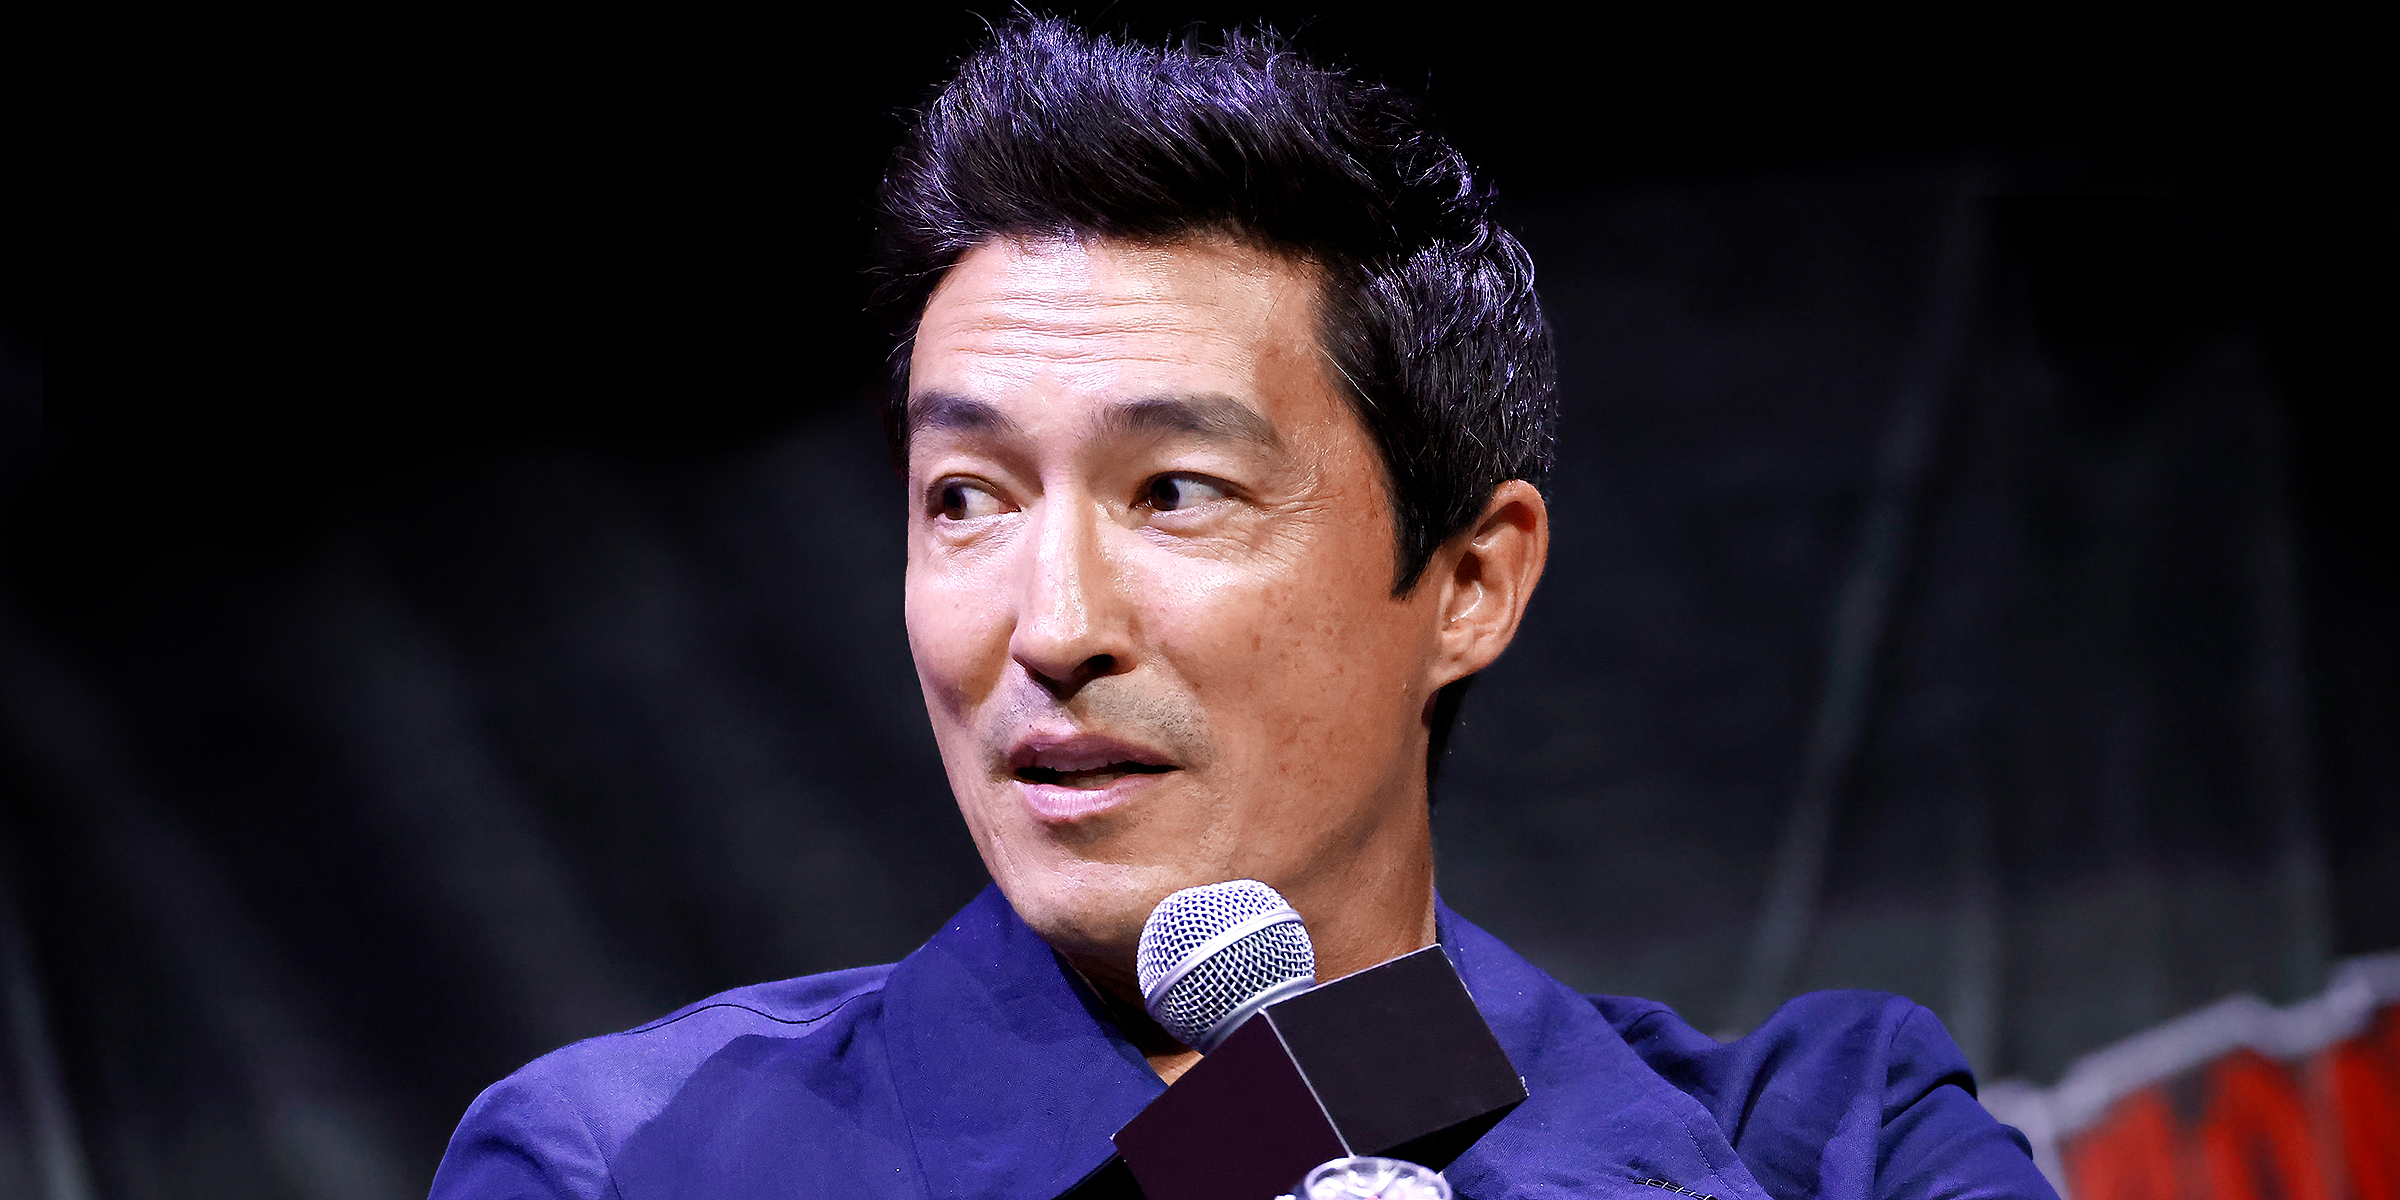 Daniel Henney | Source: Getty Images